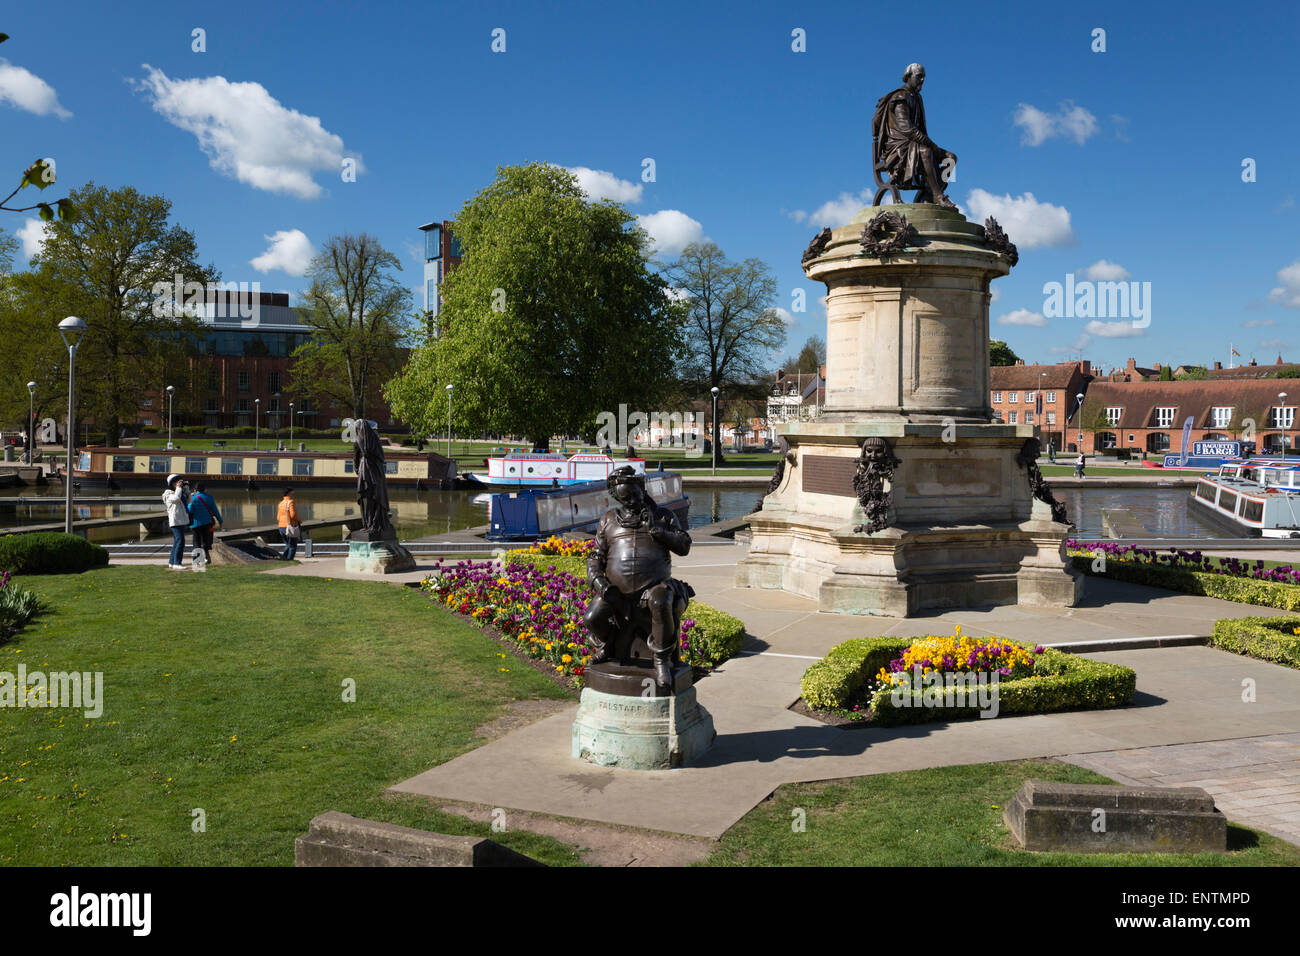 Monument de Shakespeare, Stratford-upon-Avon, Warwickshire, Angleterre, Royaume-Uni, Europe Banque D'Images